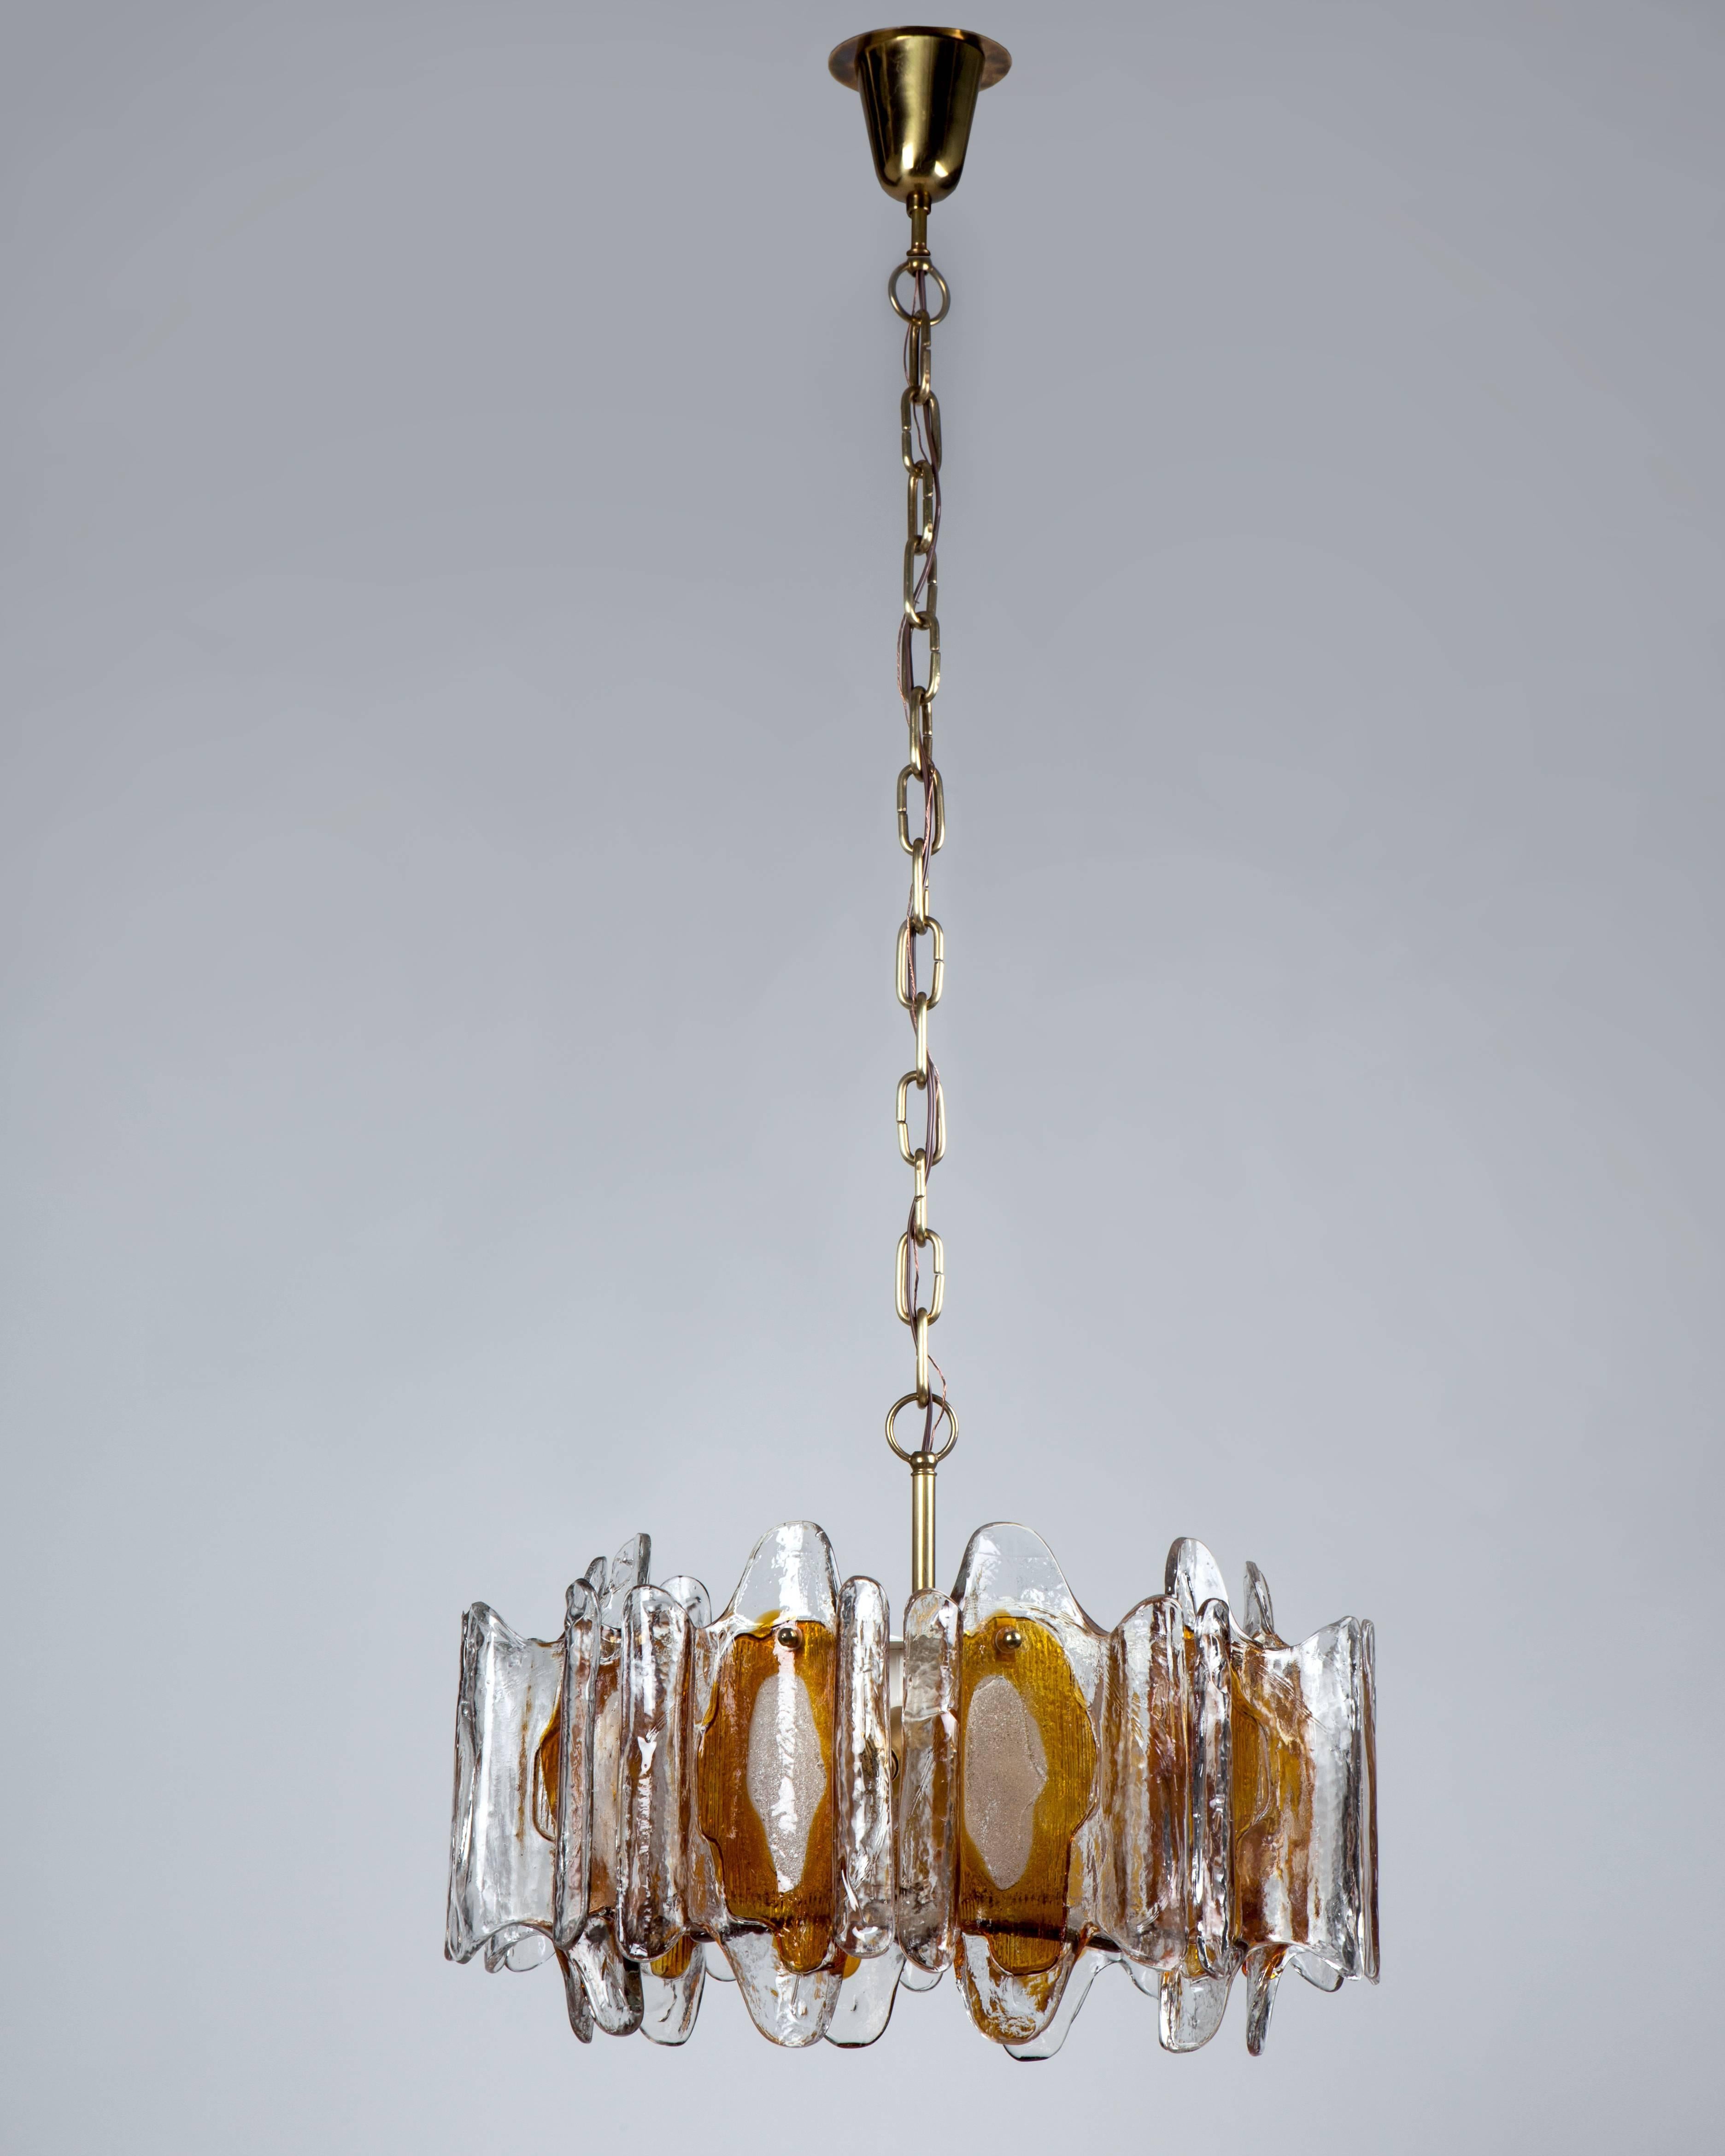 AHL3979.
A vintage orange and clear textured glass chandelier in its original white enamel and brass finish. This mid century modern fixture is attributed to the Swedish glassmaker Kalmar. Due to the antique nature of this fixture, there may be